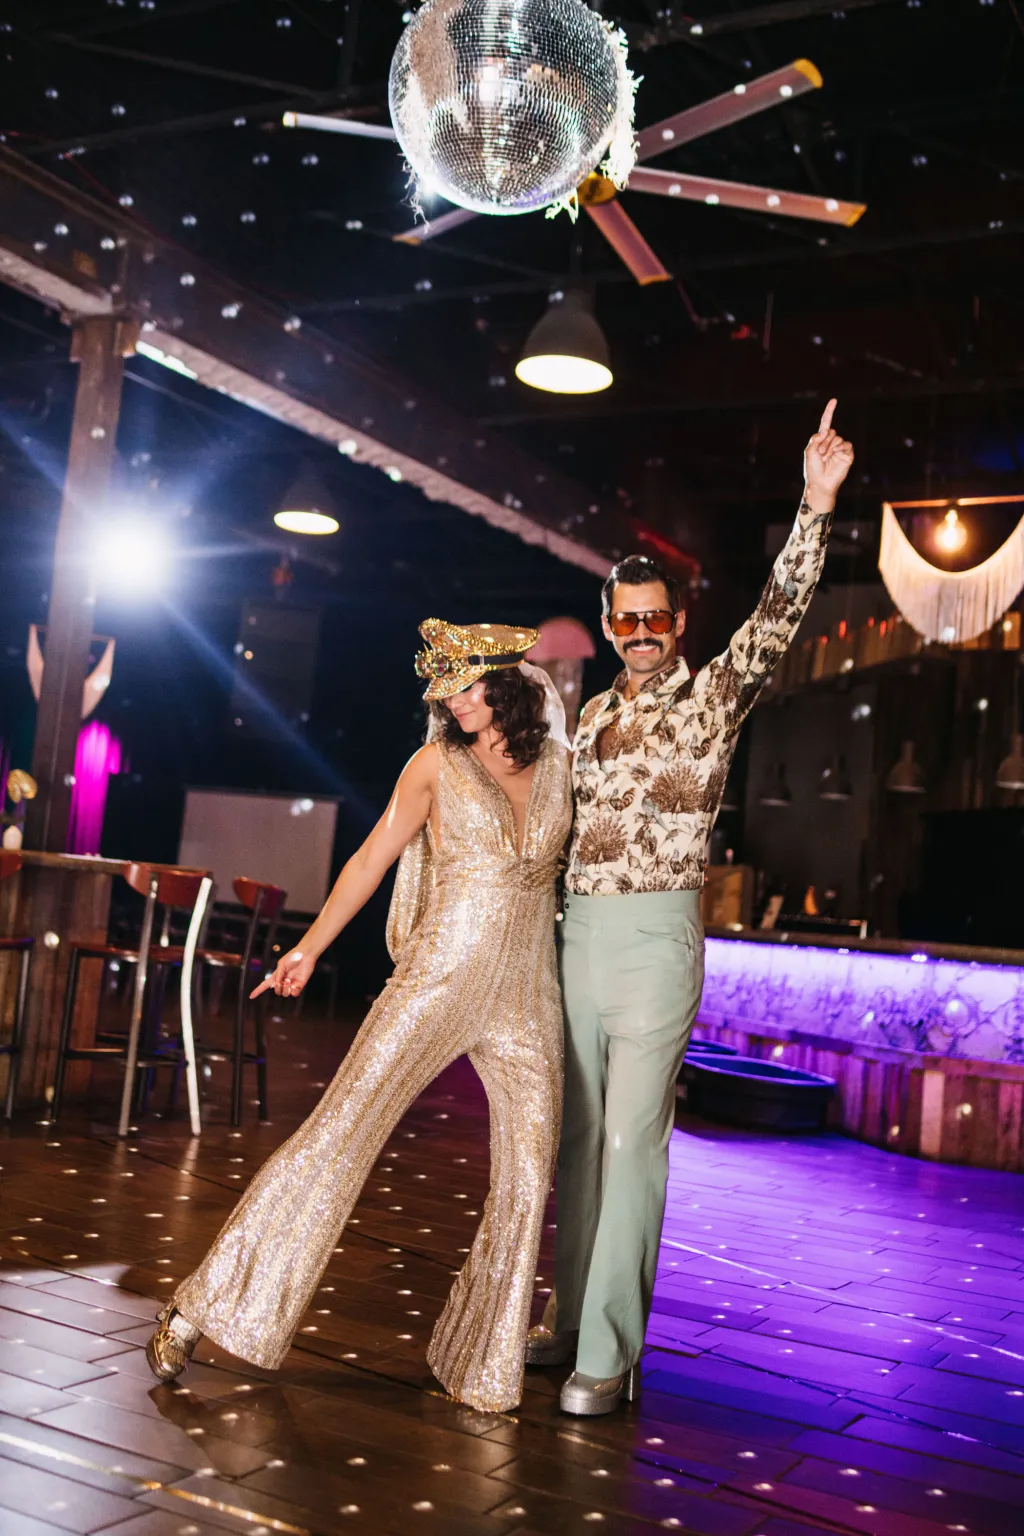 Disco Party Outfits - 37 Ideas on What to Wear to a Disco?